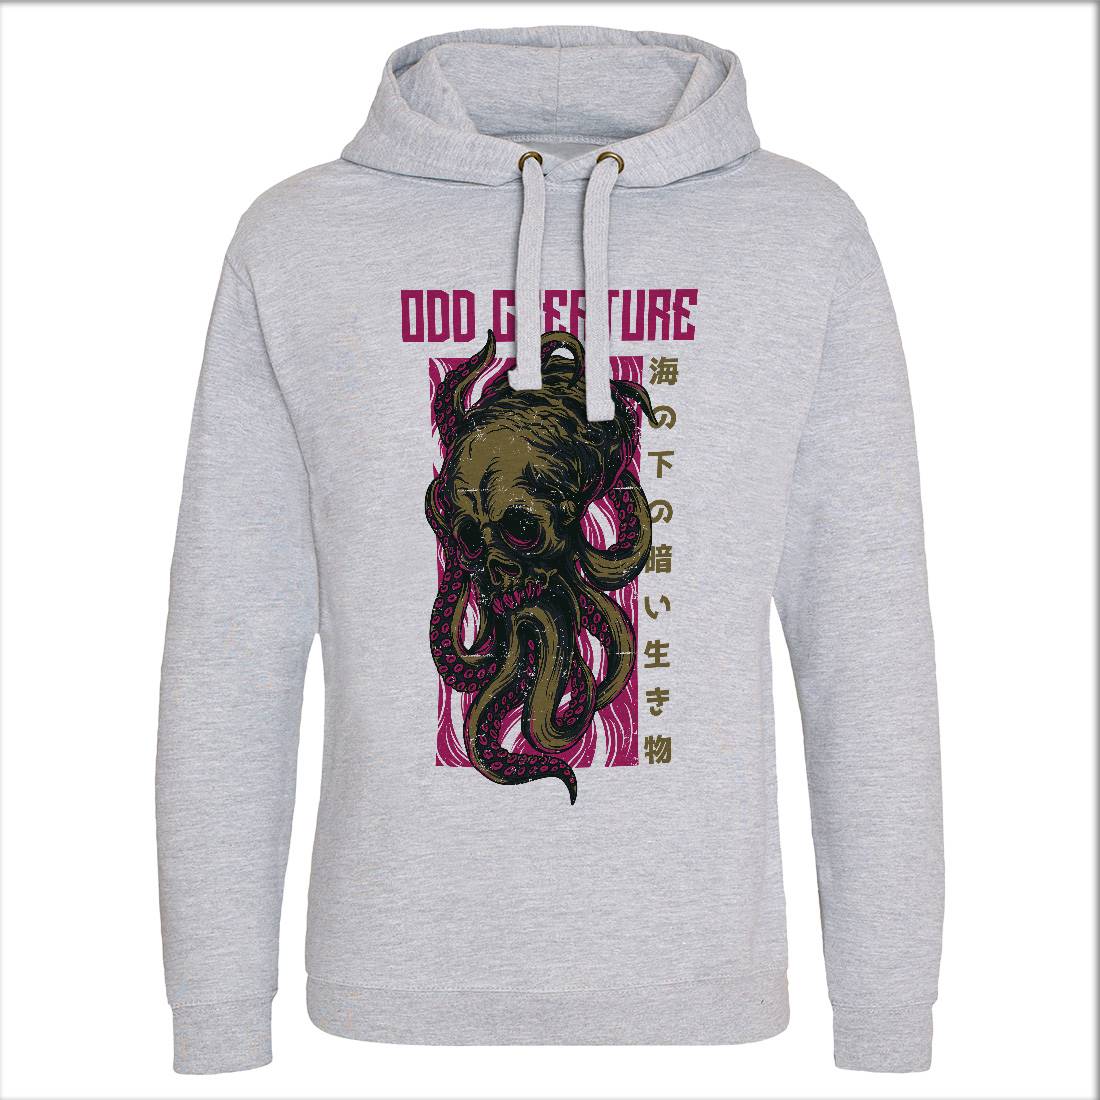 Octopus Mens Hoodie Without Pocket Navy D670